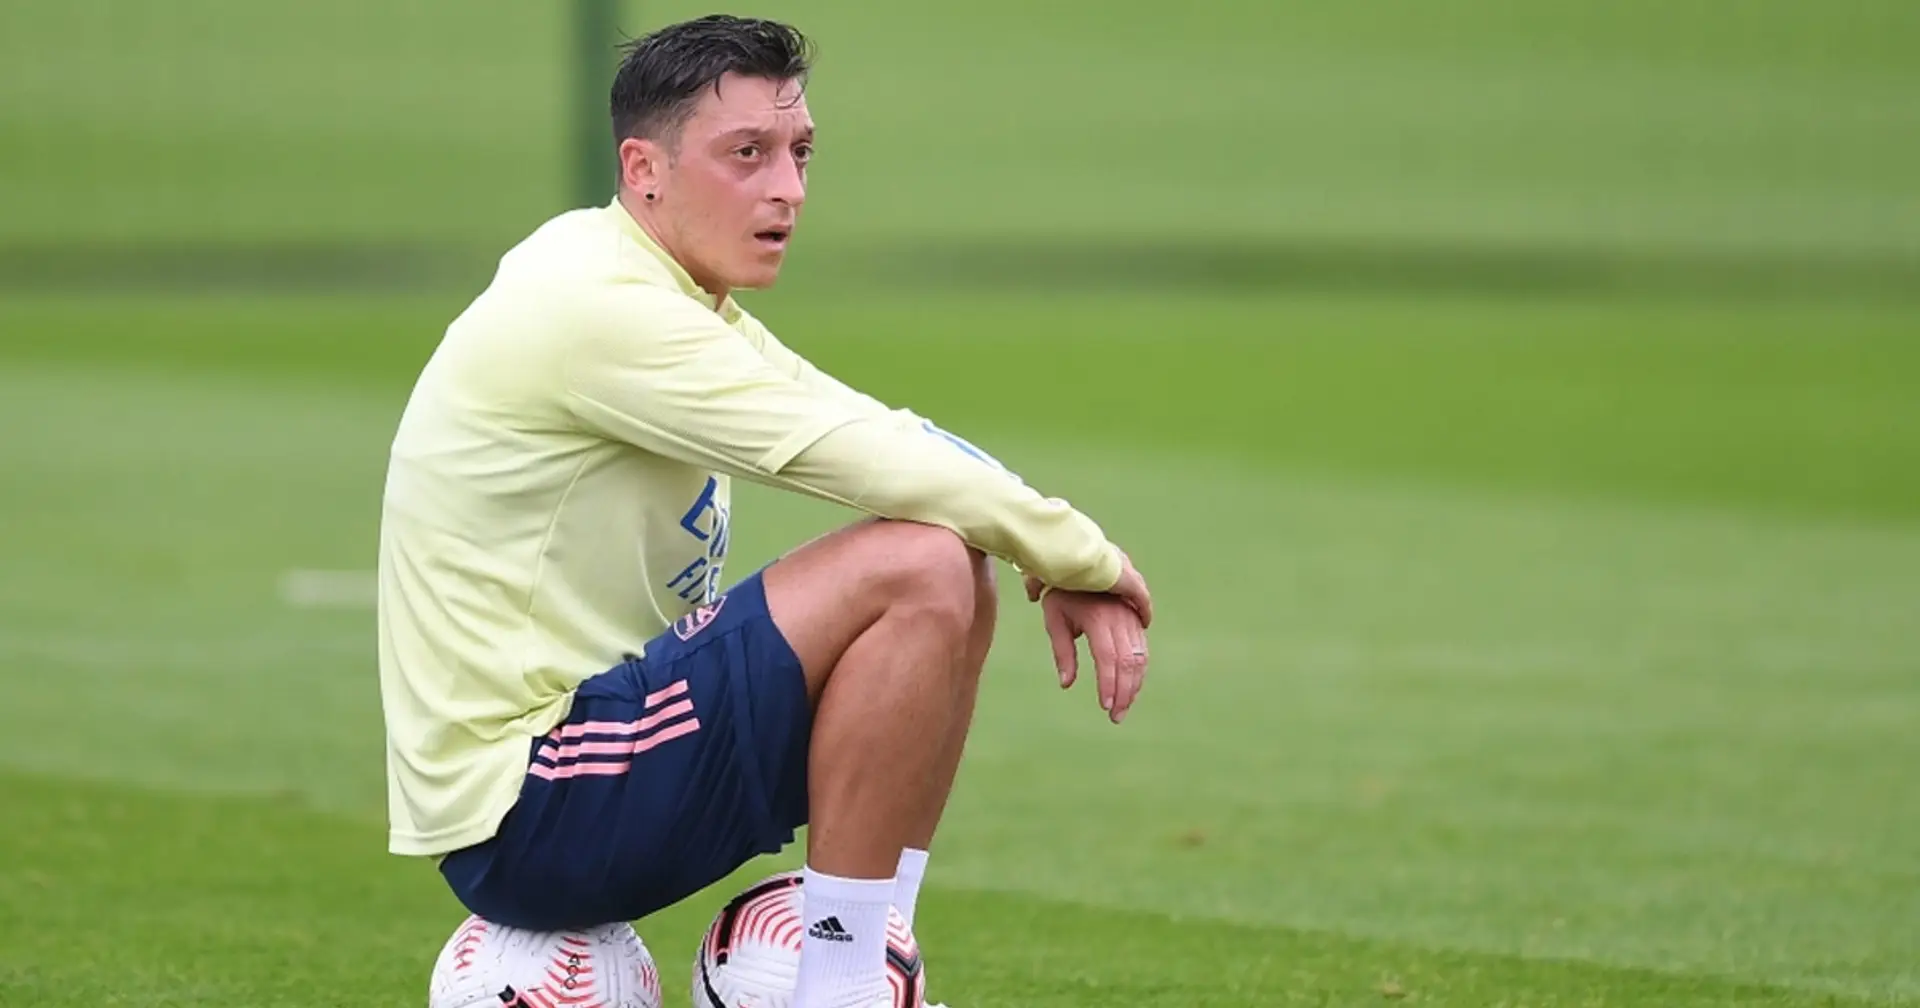 'You're paying Ozil 350k & you aren't creating. If he can help even short-term, why not use him?': Arsenal supporter baffled by Mesut's omission